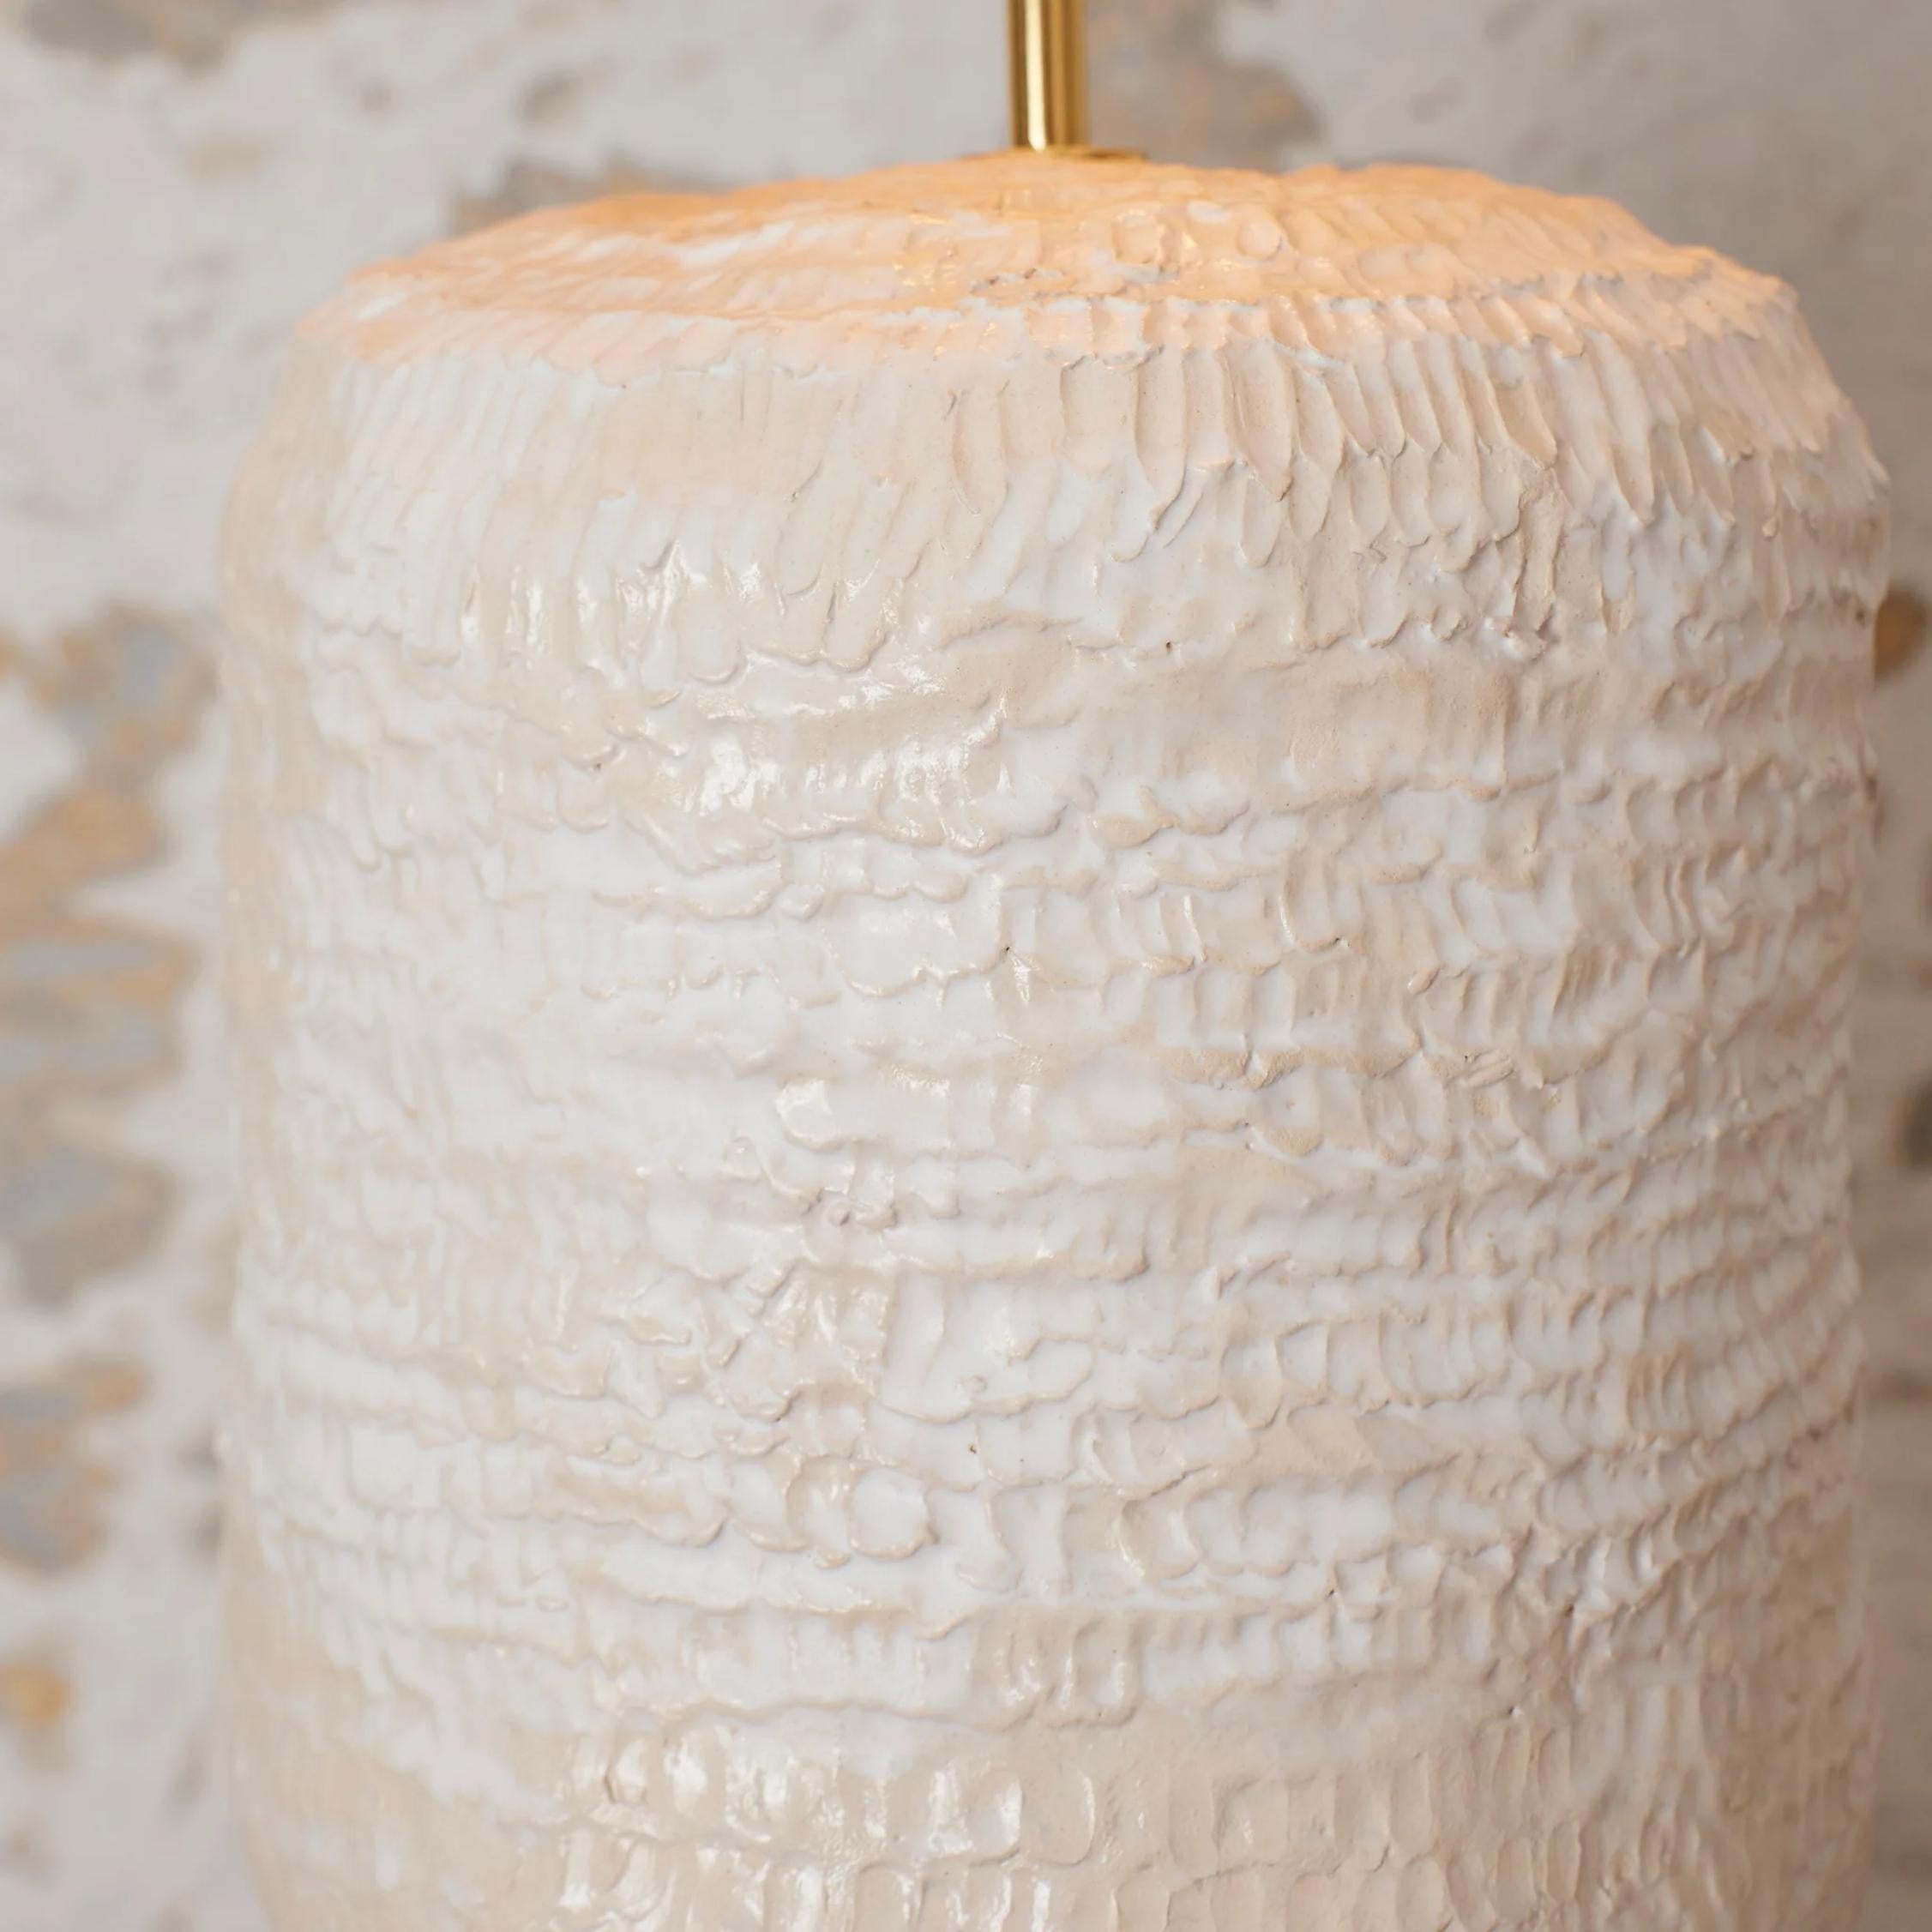 Portuguese Textured Ceramic Lamp by Project 213A For Sale